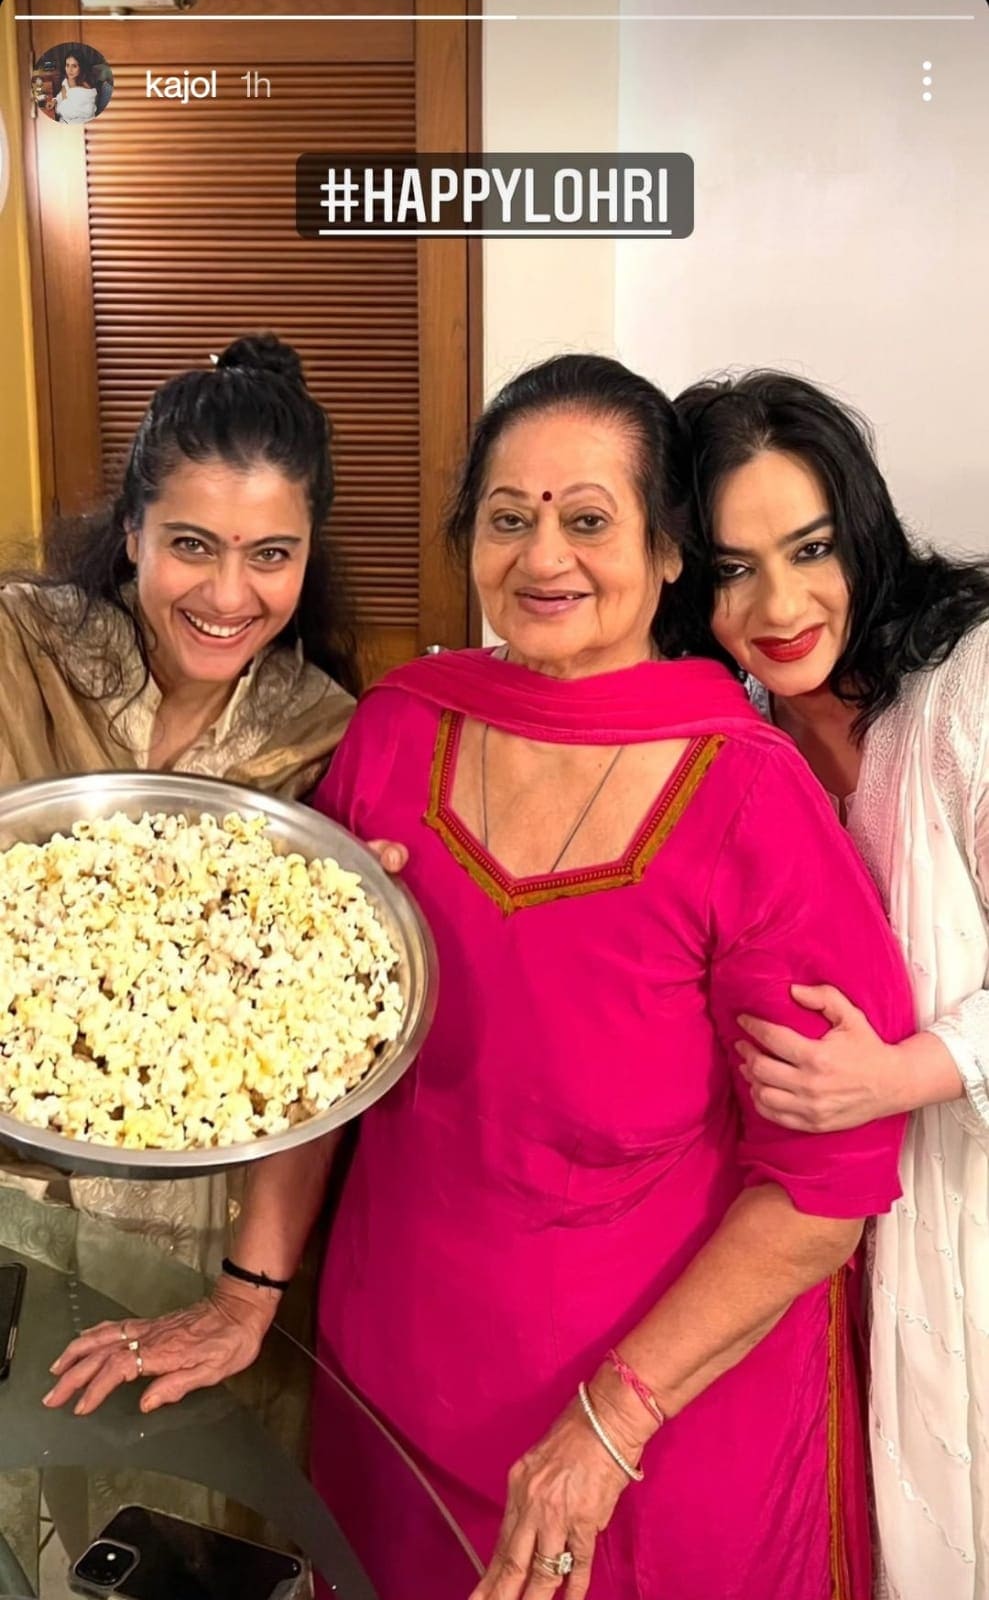 The picture posted by Kajol with mom-in-law Veena Devgan and sister-in-law Neelam Devgan Gandhi.